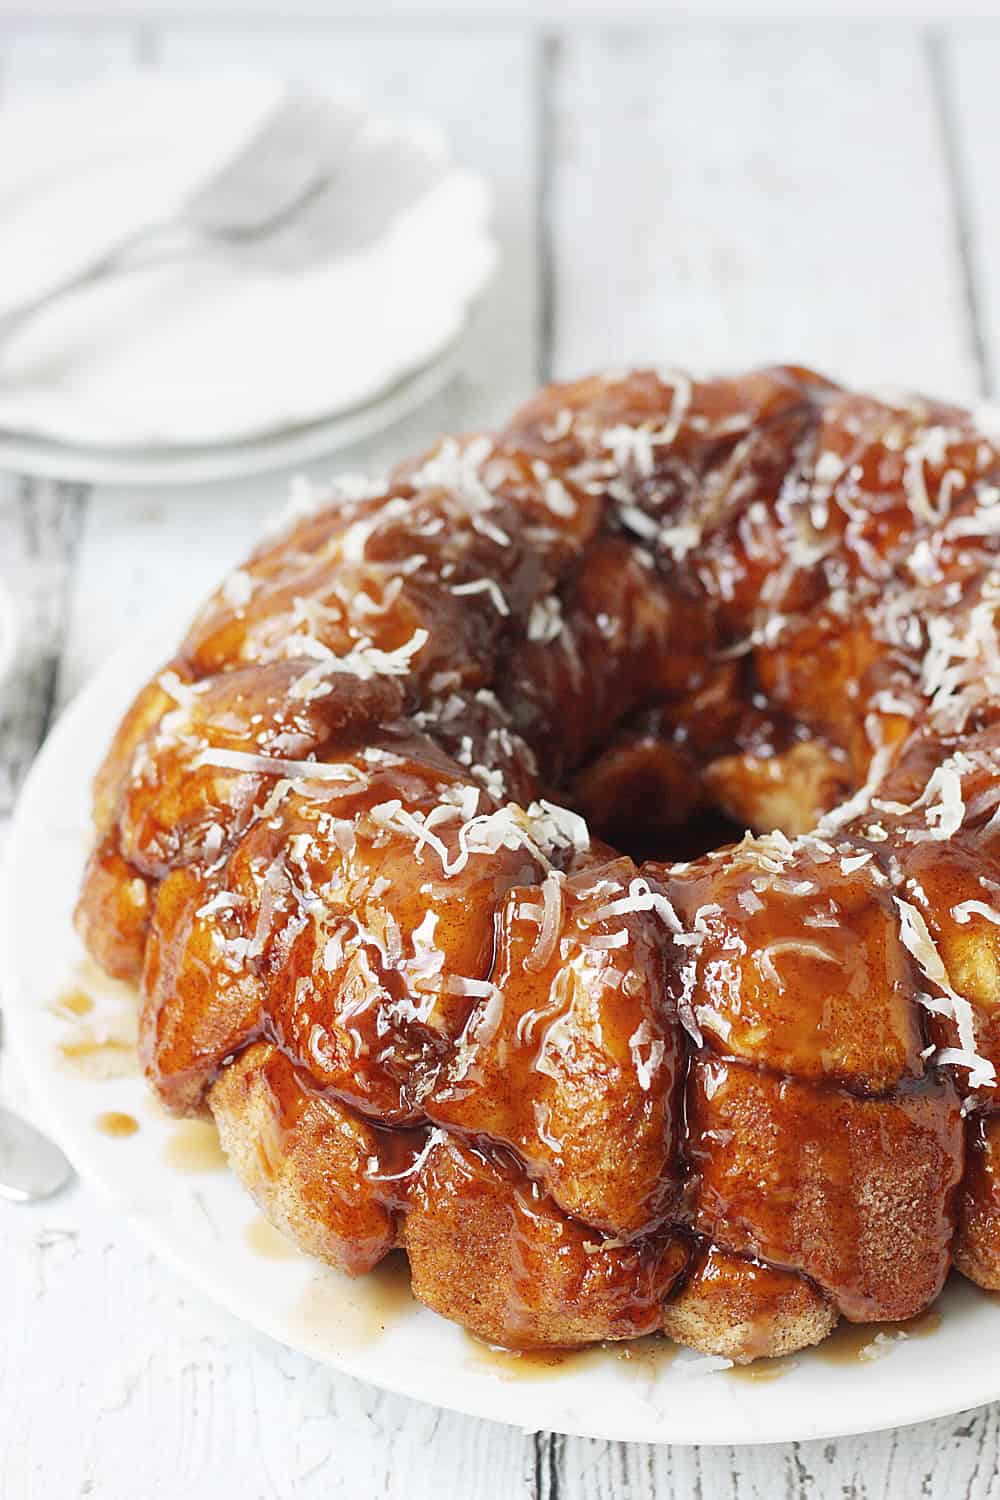 Easy Coconut Caramel Monkey Bread -- You'll want to lick every finger after eating this easy coconut caramel monkey bread! Pull-apart, cinnamon-coated bread is covered in gooey caramel sauce and sprinkled with sweet shredded coconut. It's to die for! #halfscratched #monkeybread #bread #dessert #easyrecipe #coconut #caramel